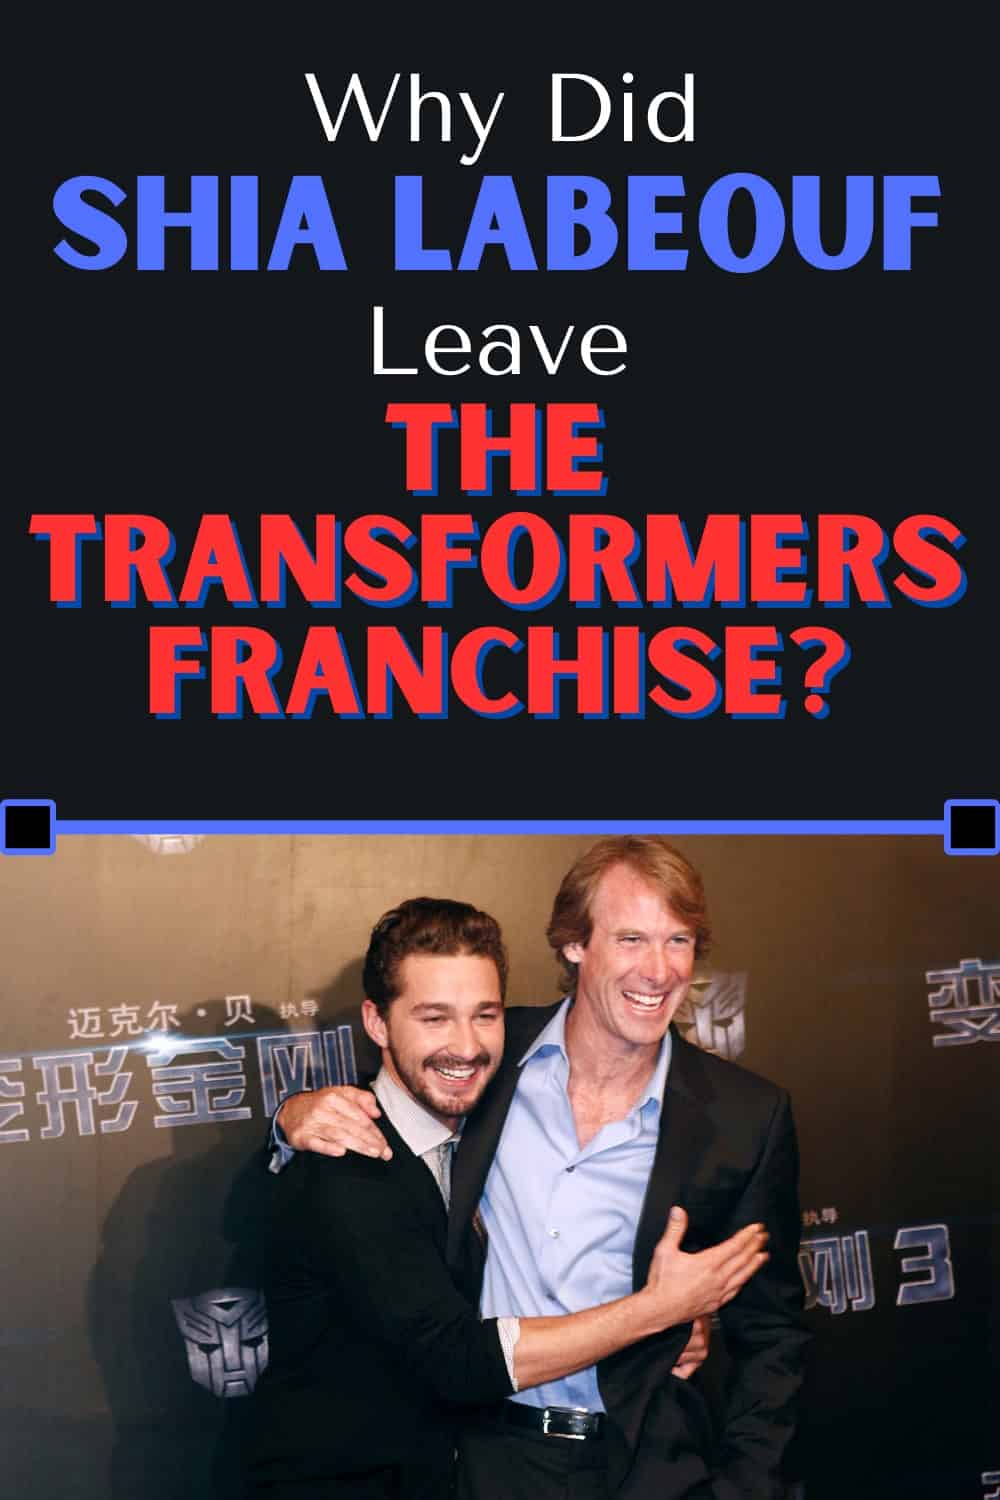 Shia LaBeouf left the Transformers franchise because the Sam Witwicky story was over